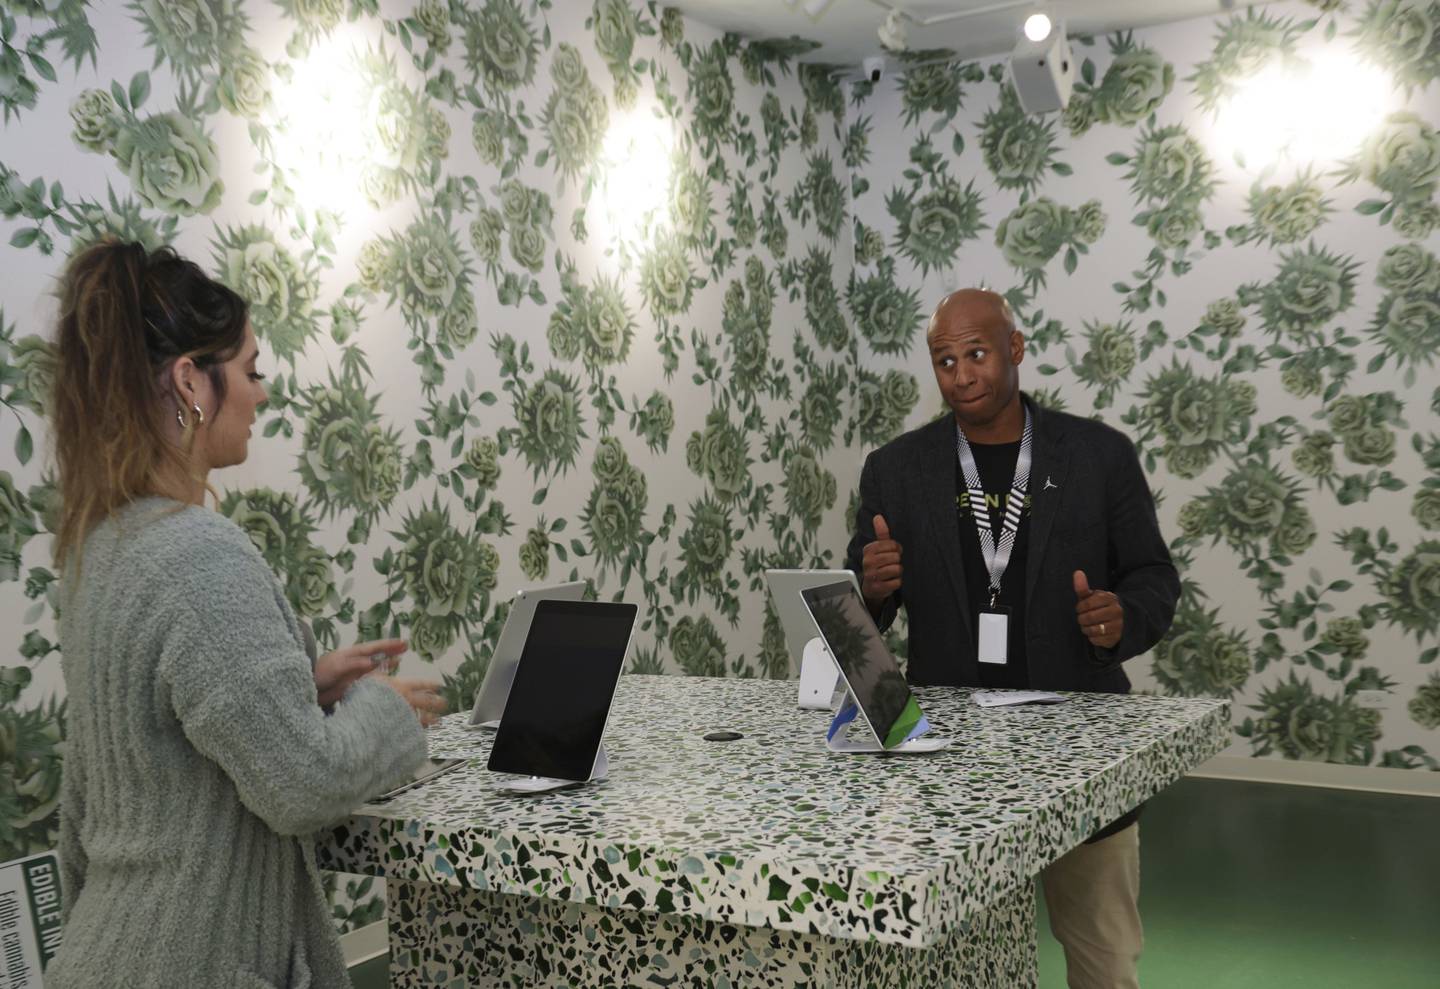 Todd Patterson, right, and Candice Sagala help set up at the soon-to-open Green Rose Dispensary on Nov. 10, 2022, in Chicago.